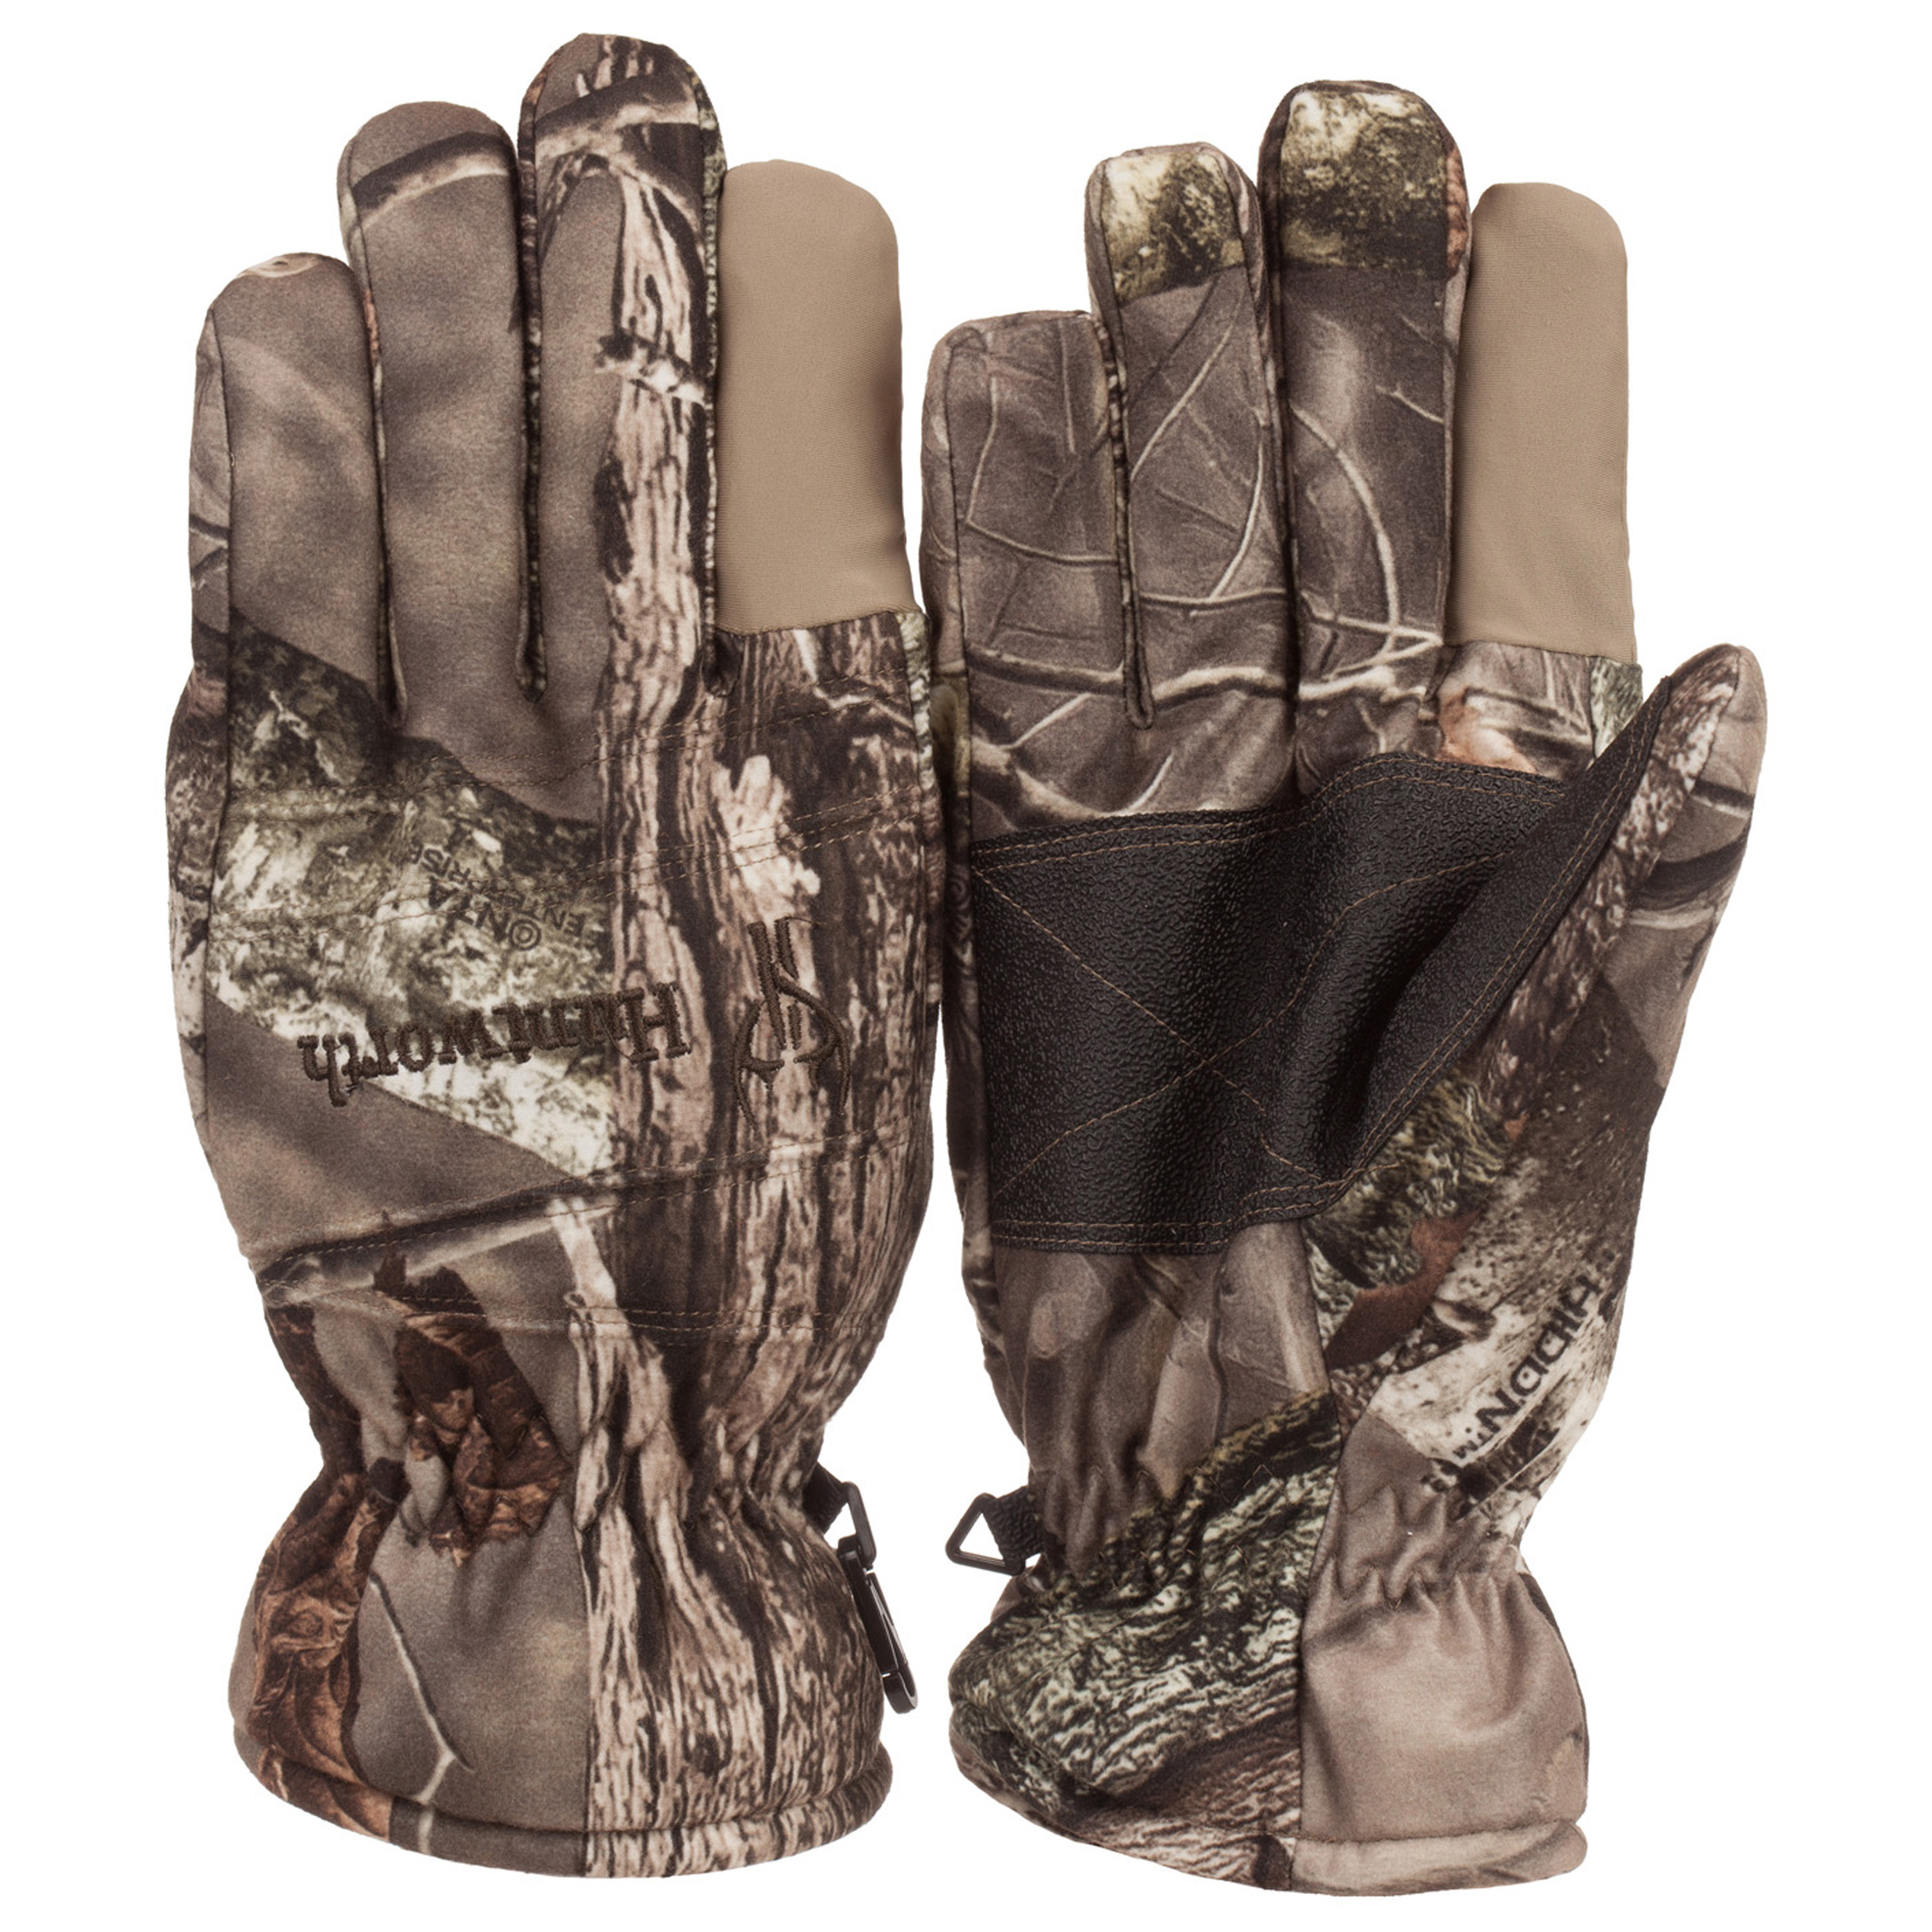 Durable Water-Resistant Hunting Gloves with Sure GriP Palm, Blaze